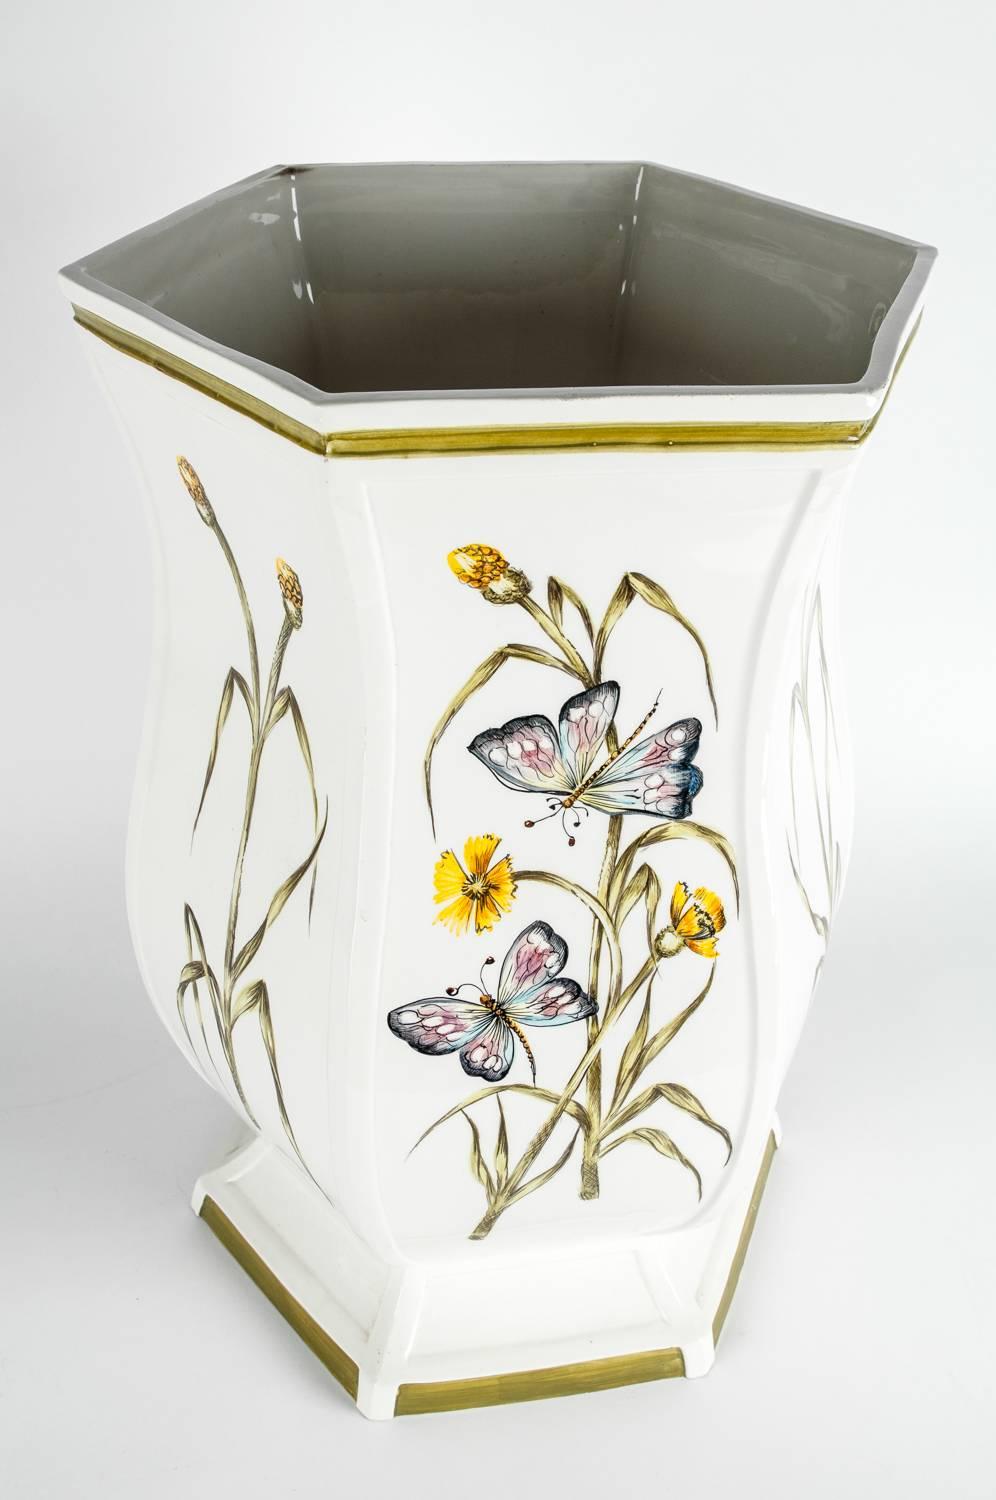 Mid-20th century Italian Porcelain umbrella / cane stand with painted exterior design details. The umbrella stand is in excellent condition, it measures 19 inches high x 13 inches diameter.